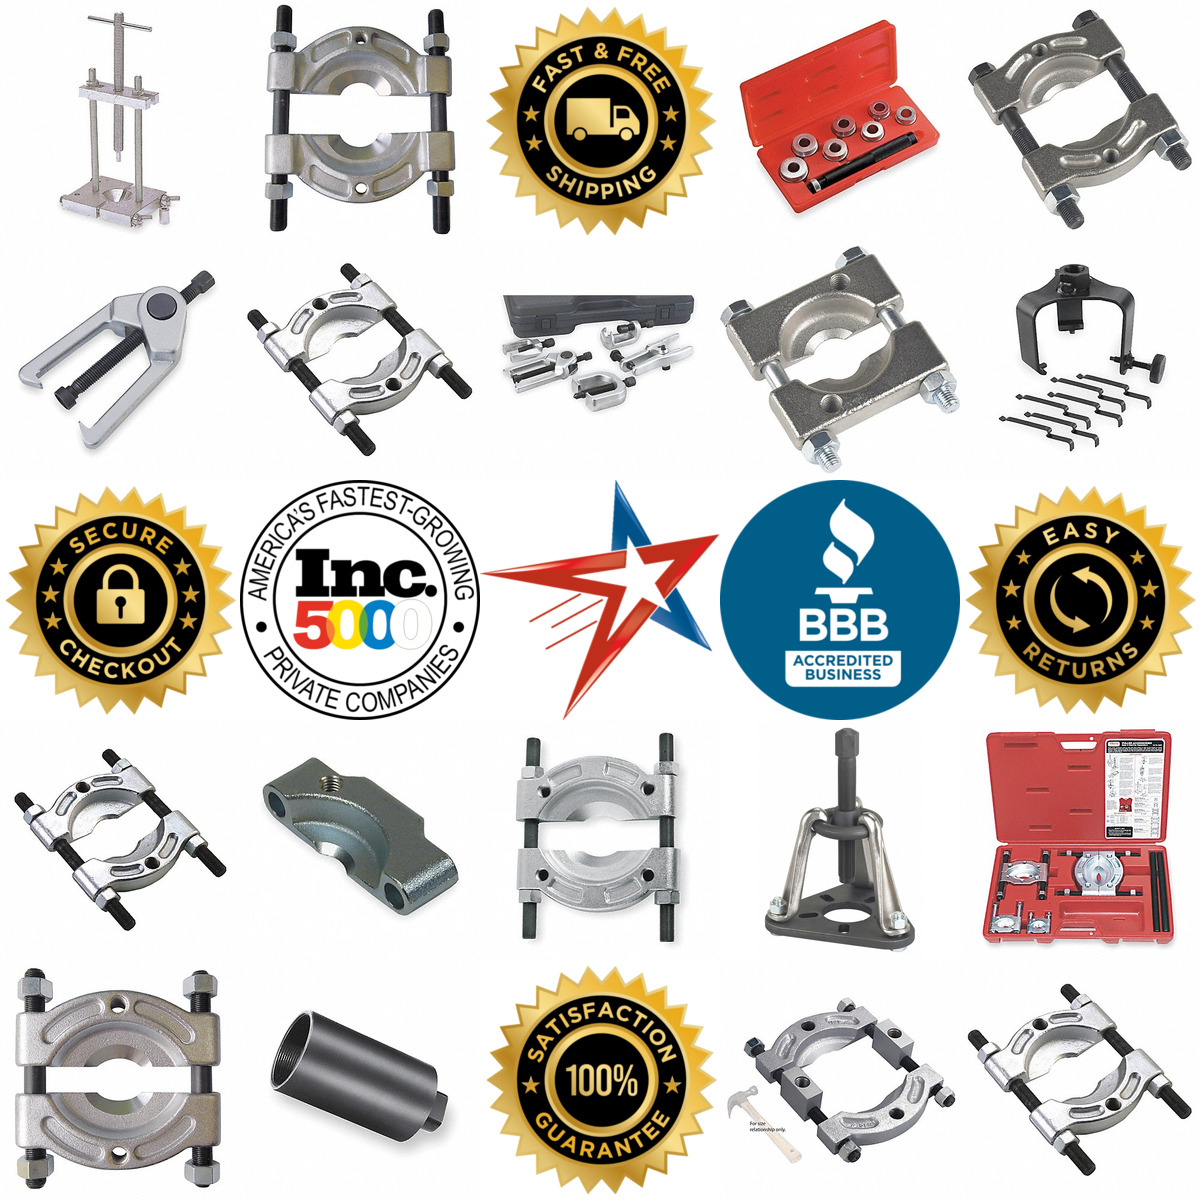 A selection of Pullers and Bearing Splitters products on GoVets